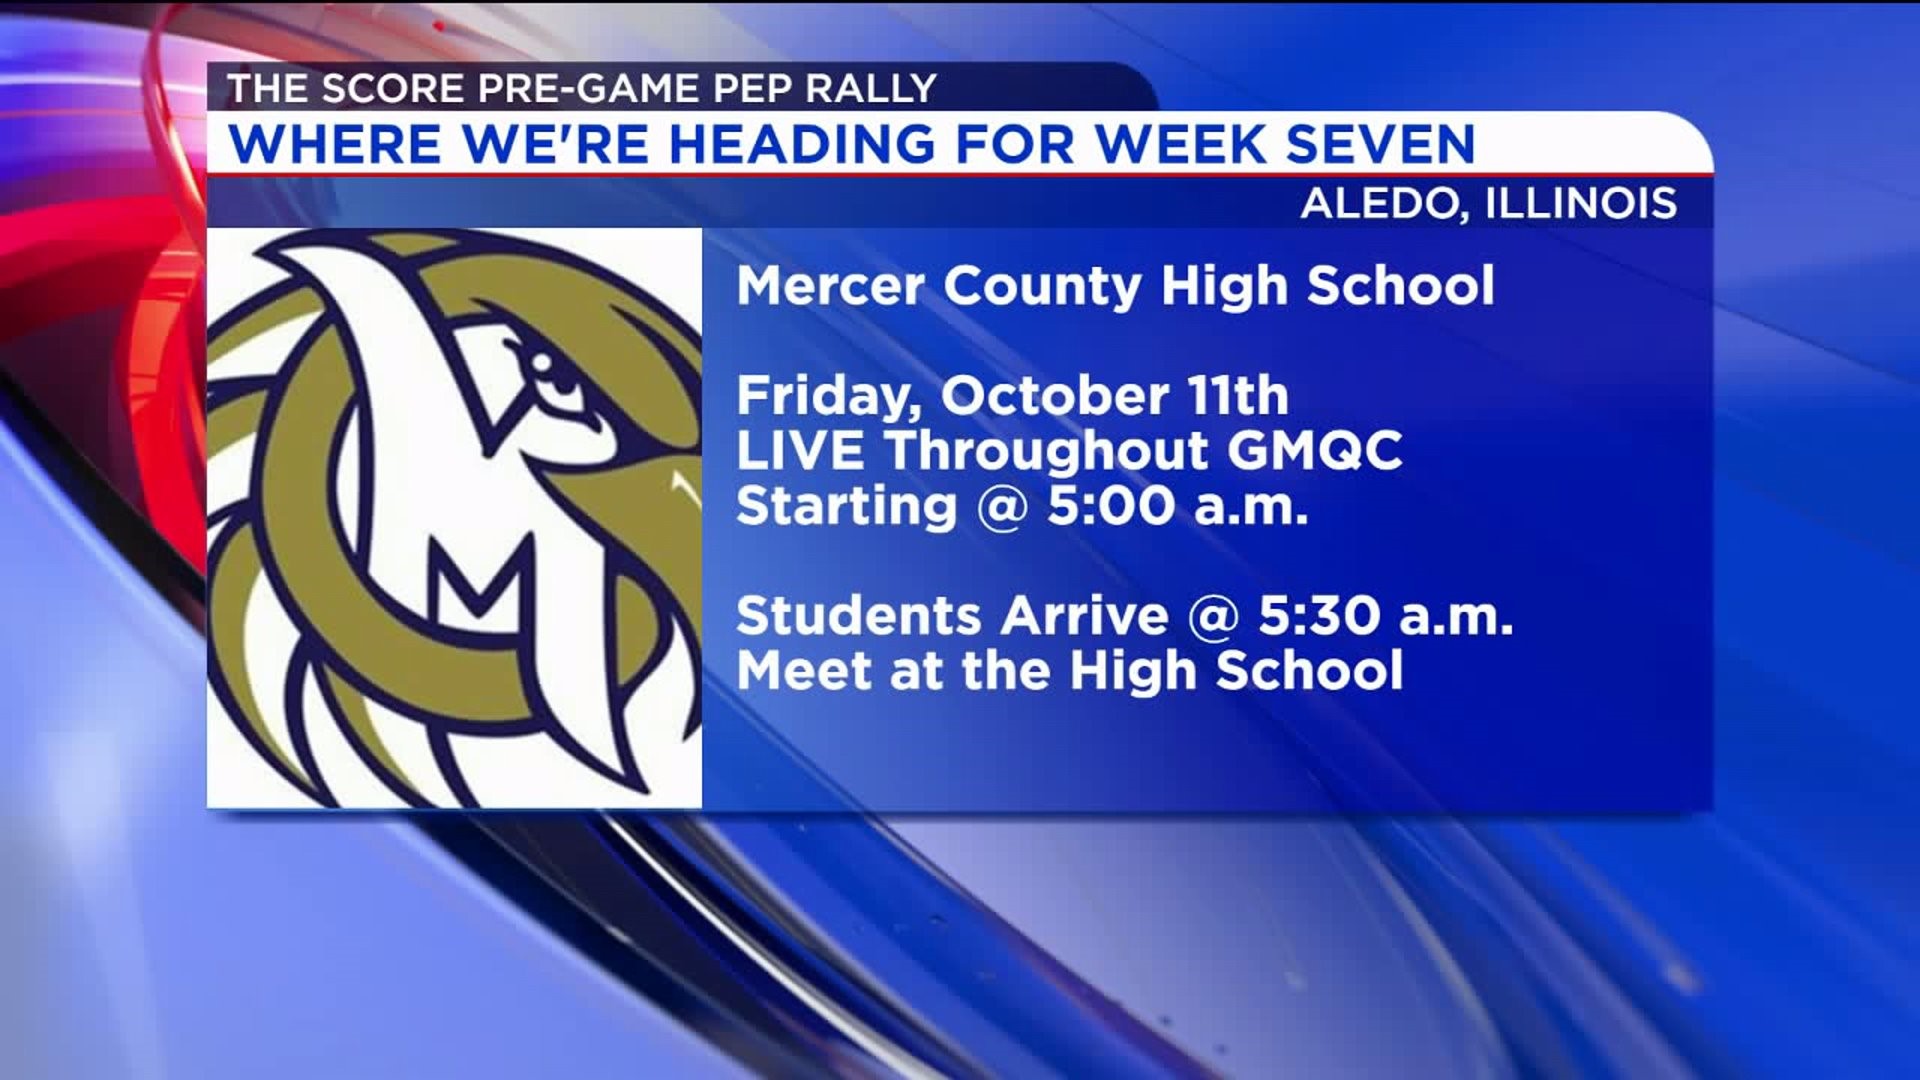 Week 7 of The Score Pre-Game Pep Rally takes us to Mercer County!